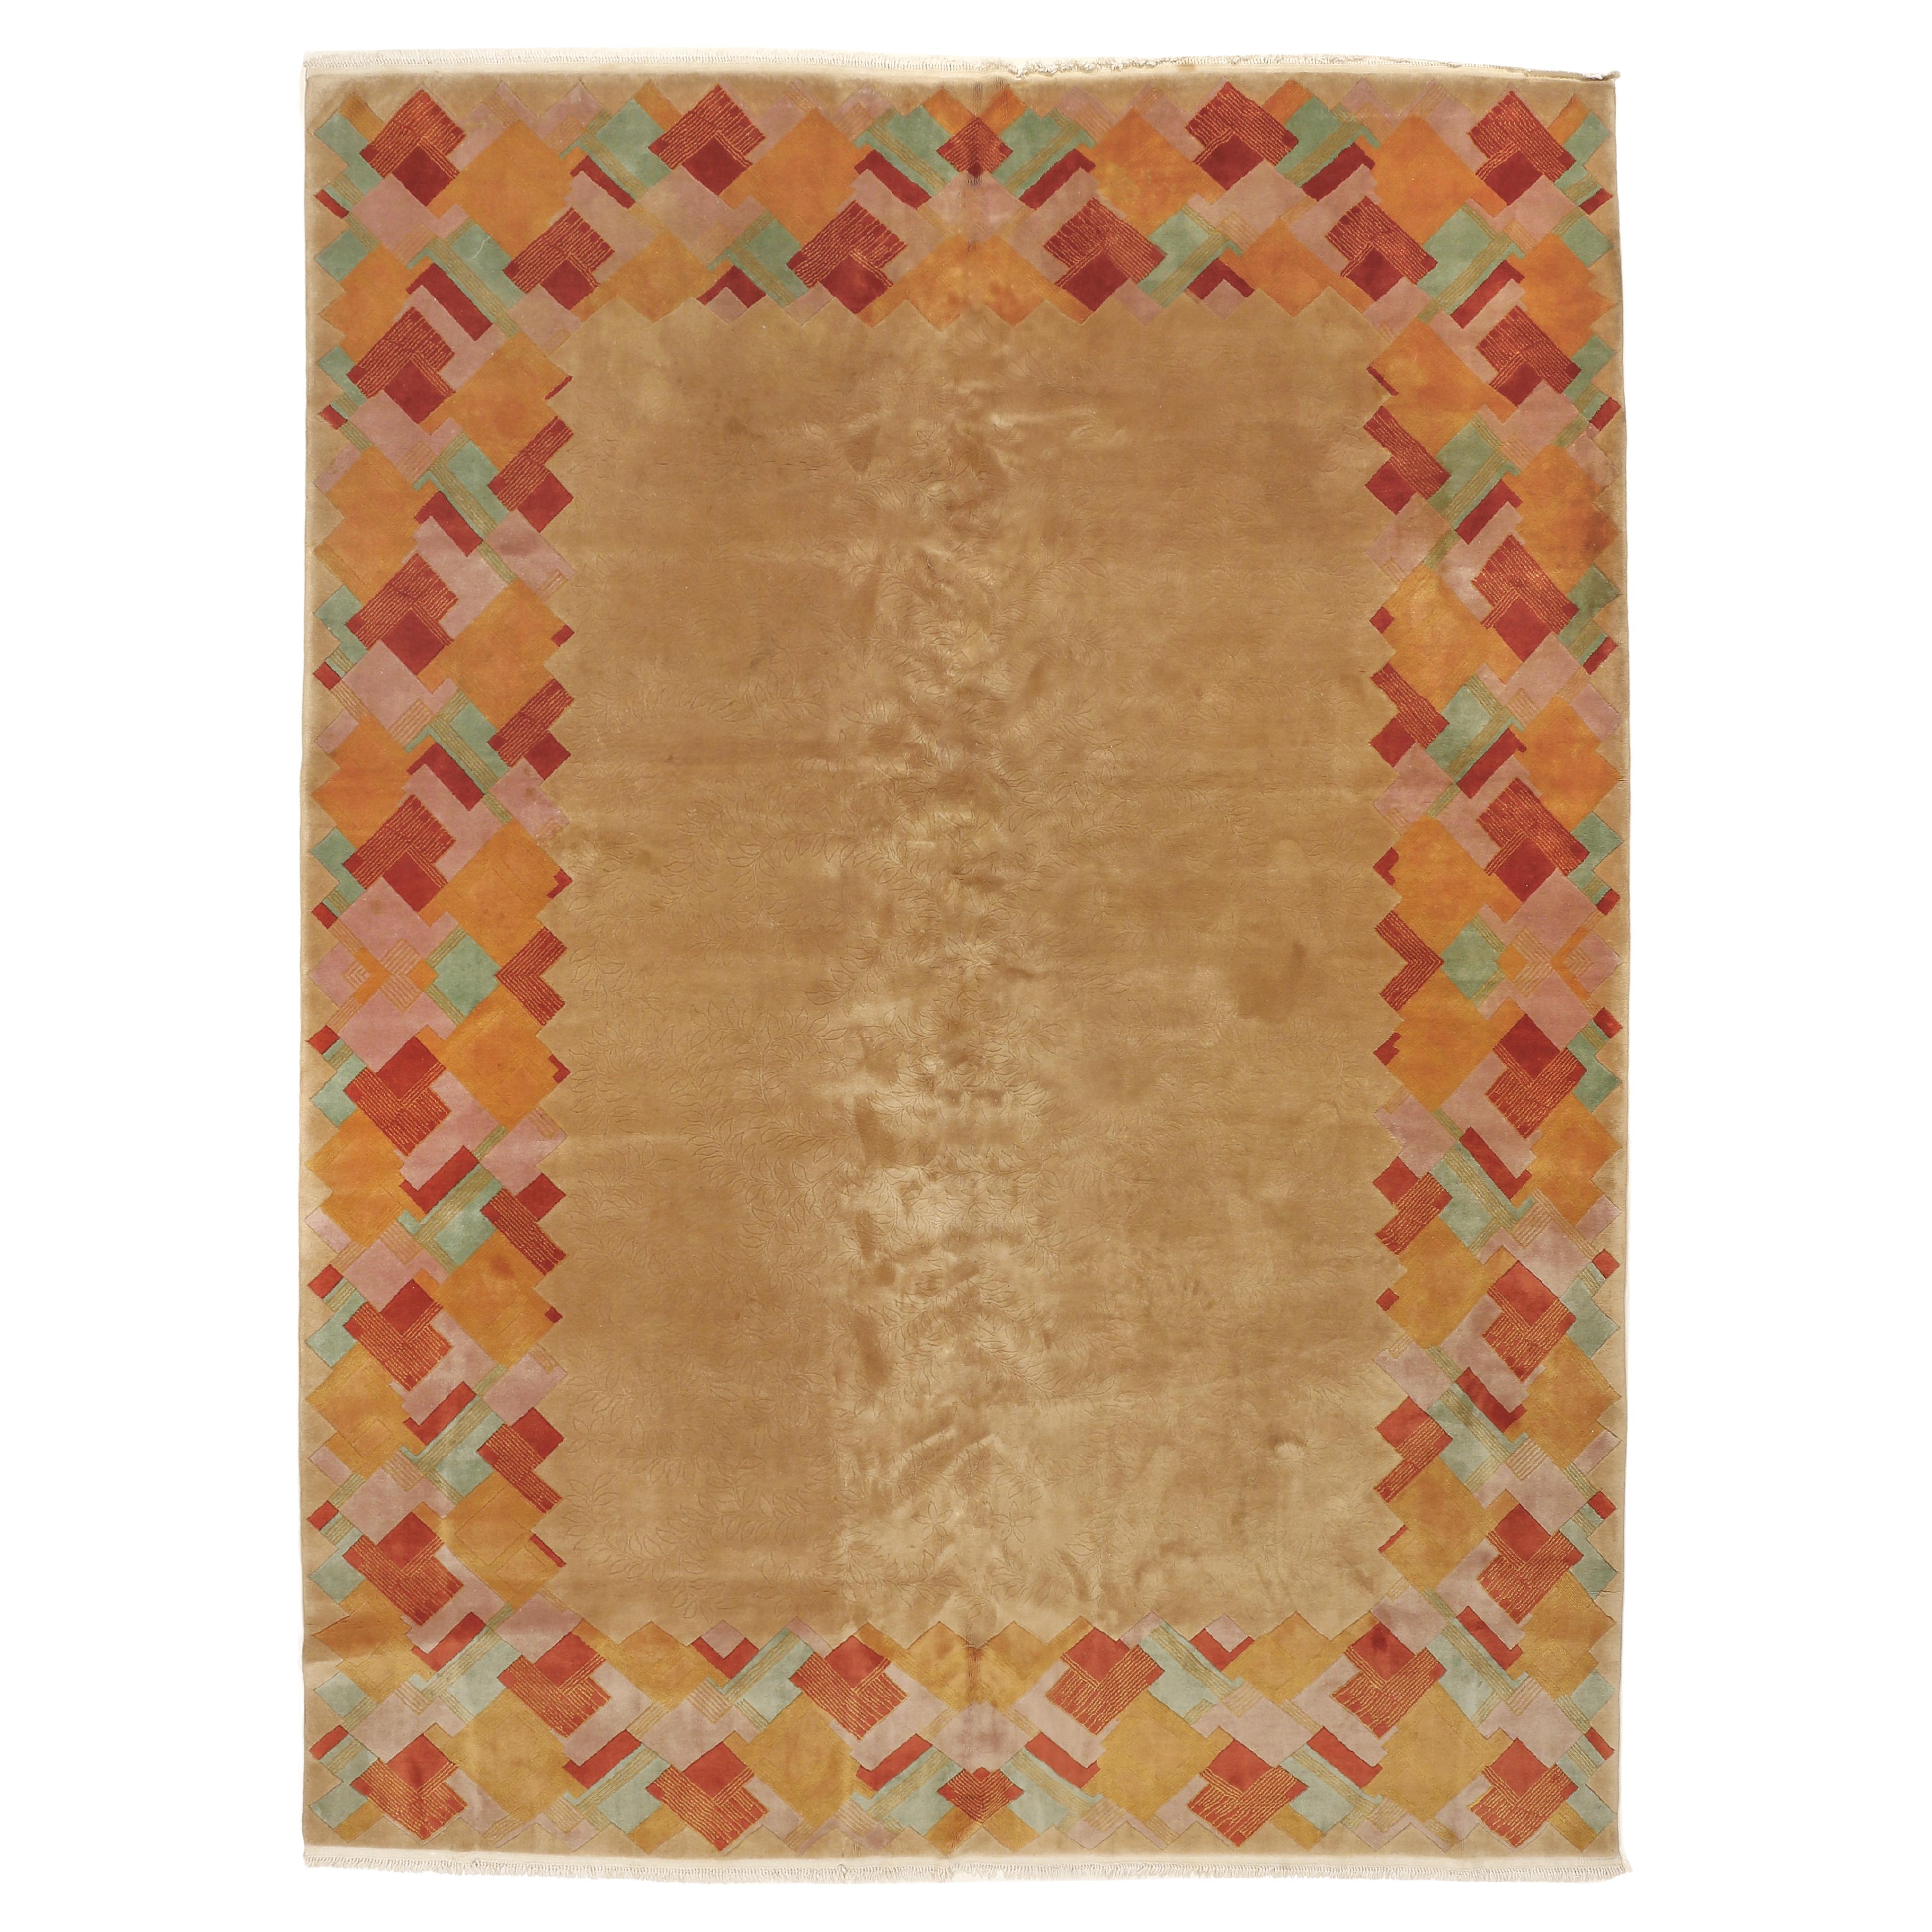 Outstanding Art Deco Chinese Rug with Cubist Border by Nichols & Co.